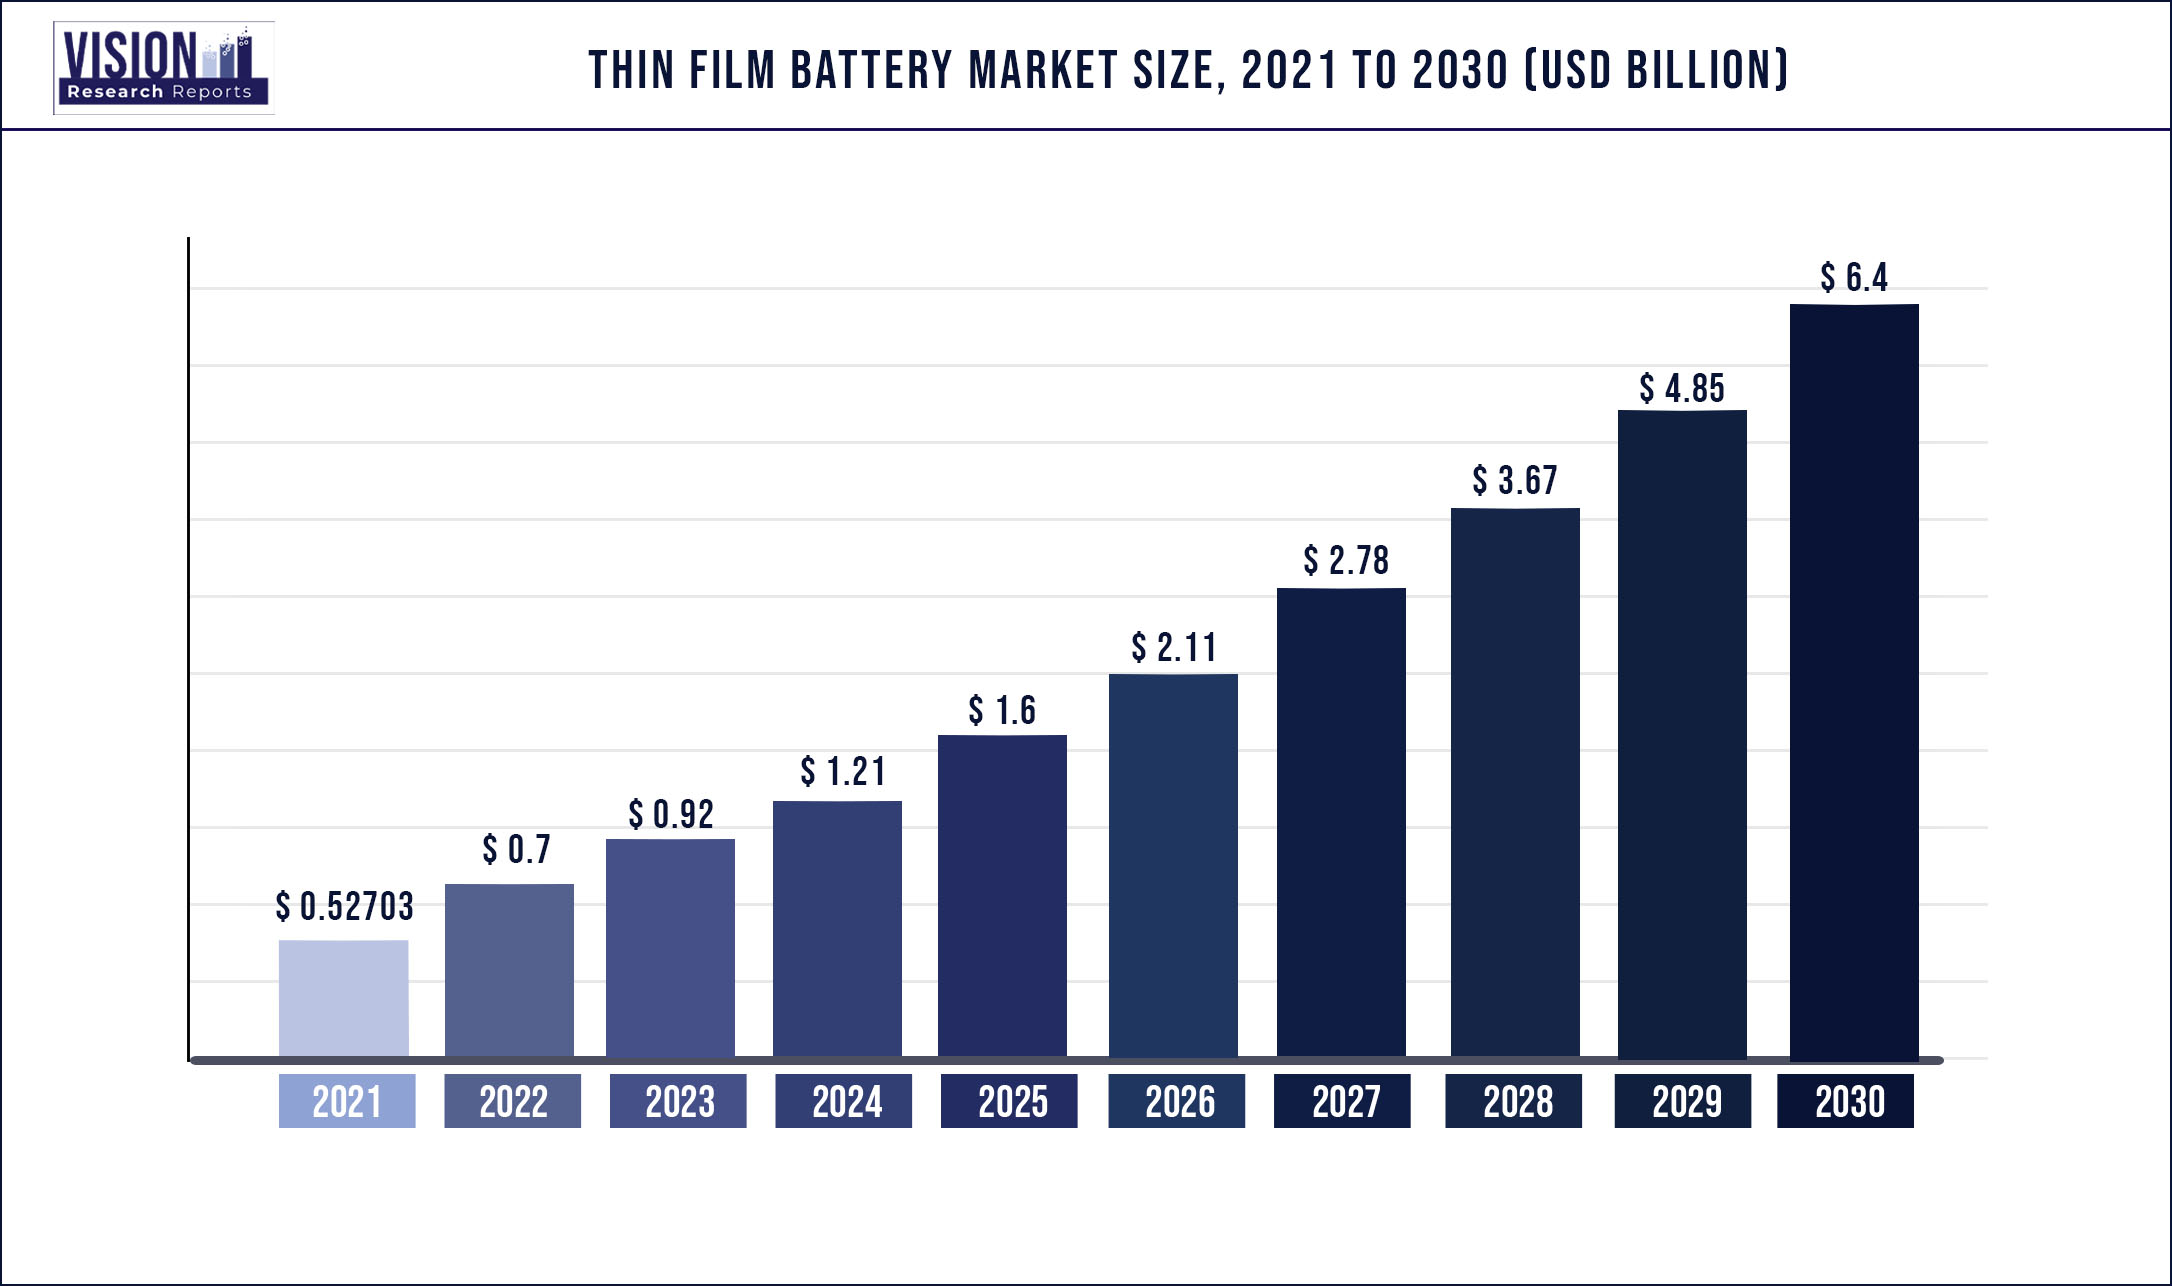 Thin Film Battery Market Size 2021 to 2030